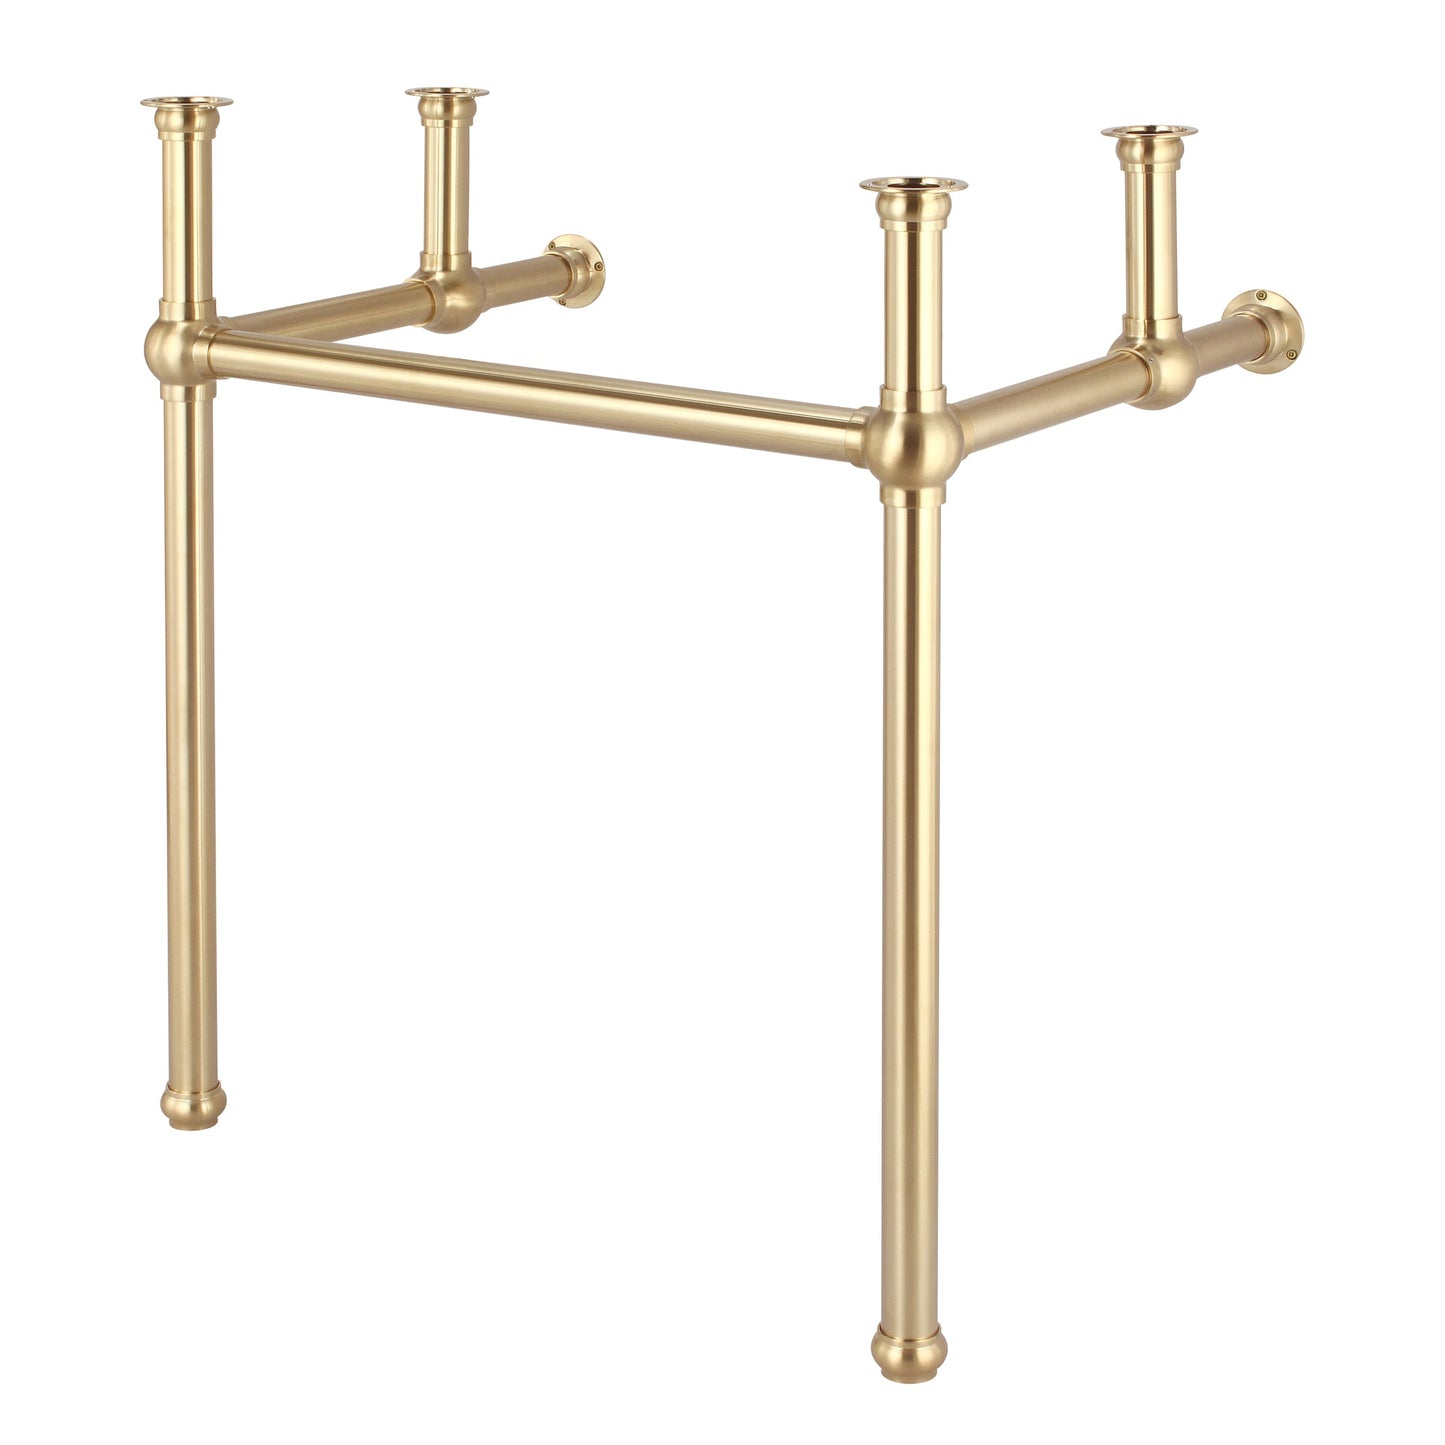 Embassy 30 Inch Wide Single Wash Stand and P-Trap included